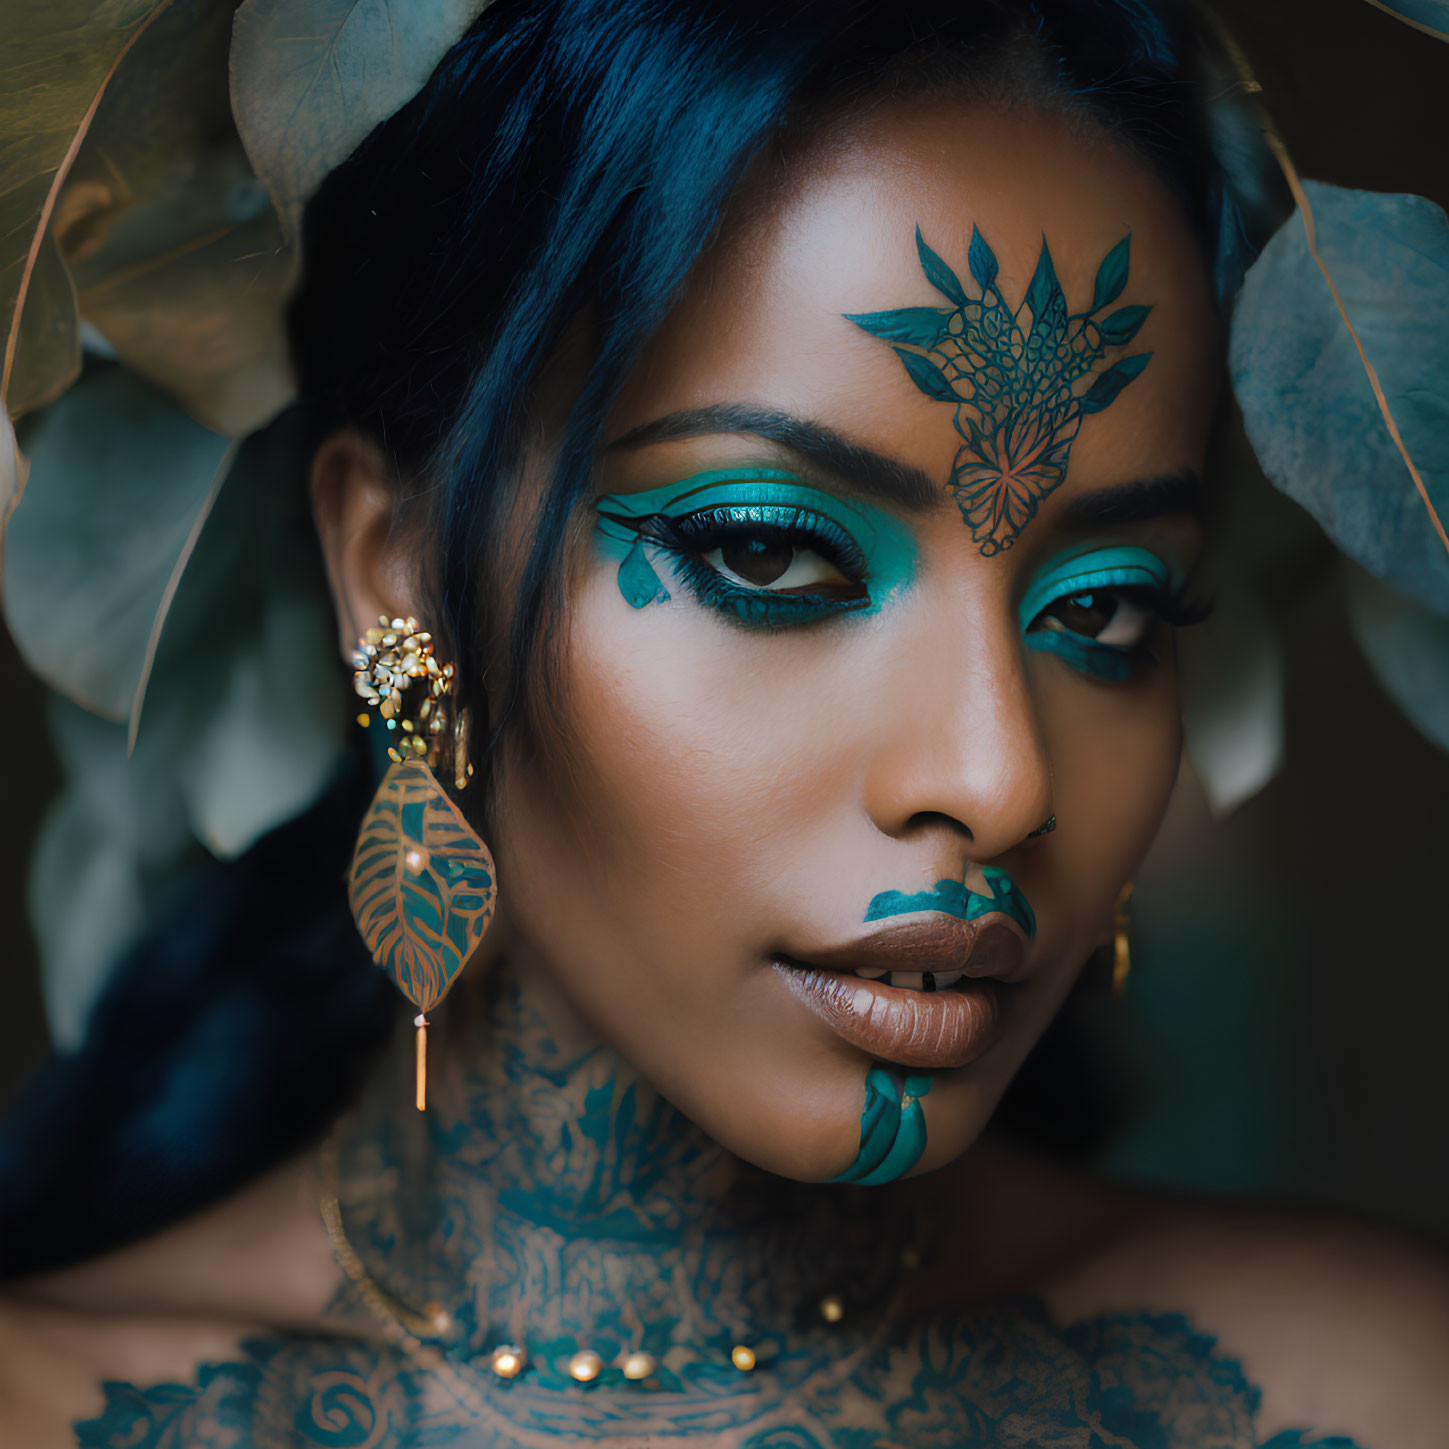 Woman with Blue Makeup, Tattoos, Gold Earrings & Leafy Accessories